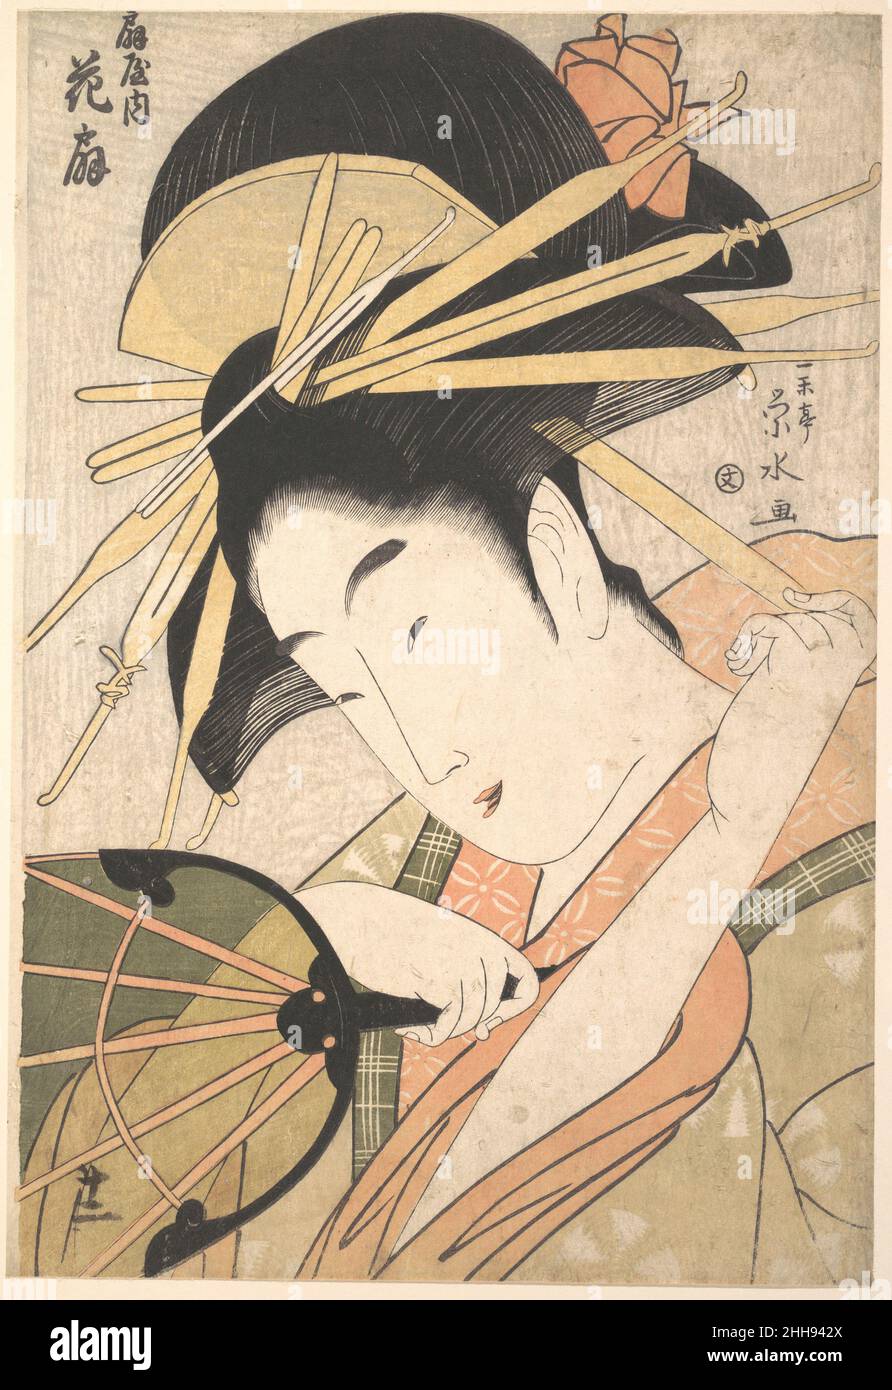 The Courtesan Hanaōgi of the Ōgiya Brothel (Ōgiya no uchi Hanaōgi) 1790s Ichirakutei Eisui Japanese The courtesan Hanaōgi fiddles with one of the hairpins holding her magnificent coiffure in place. She grasps a semitransparent circular fan that recalls her brothel’s name, Ōgiya, literally “House of Fans.” Hanaōgi was a name used by a succession of high-ranking courtesans of this house. This image is in all likelihood meant to represent Hanaōgi VI, who was known to be talented in poetry, singing, and other literary arts.. The Courtesan Hanaōgi of the Ōgiya Brothel (Ōgiya no uchi Hanaōgi)  56096 Stock Photo